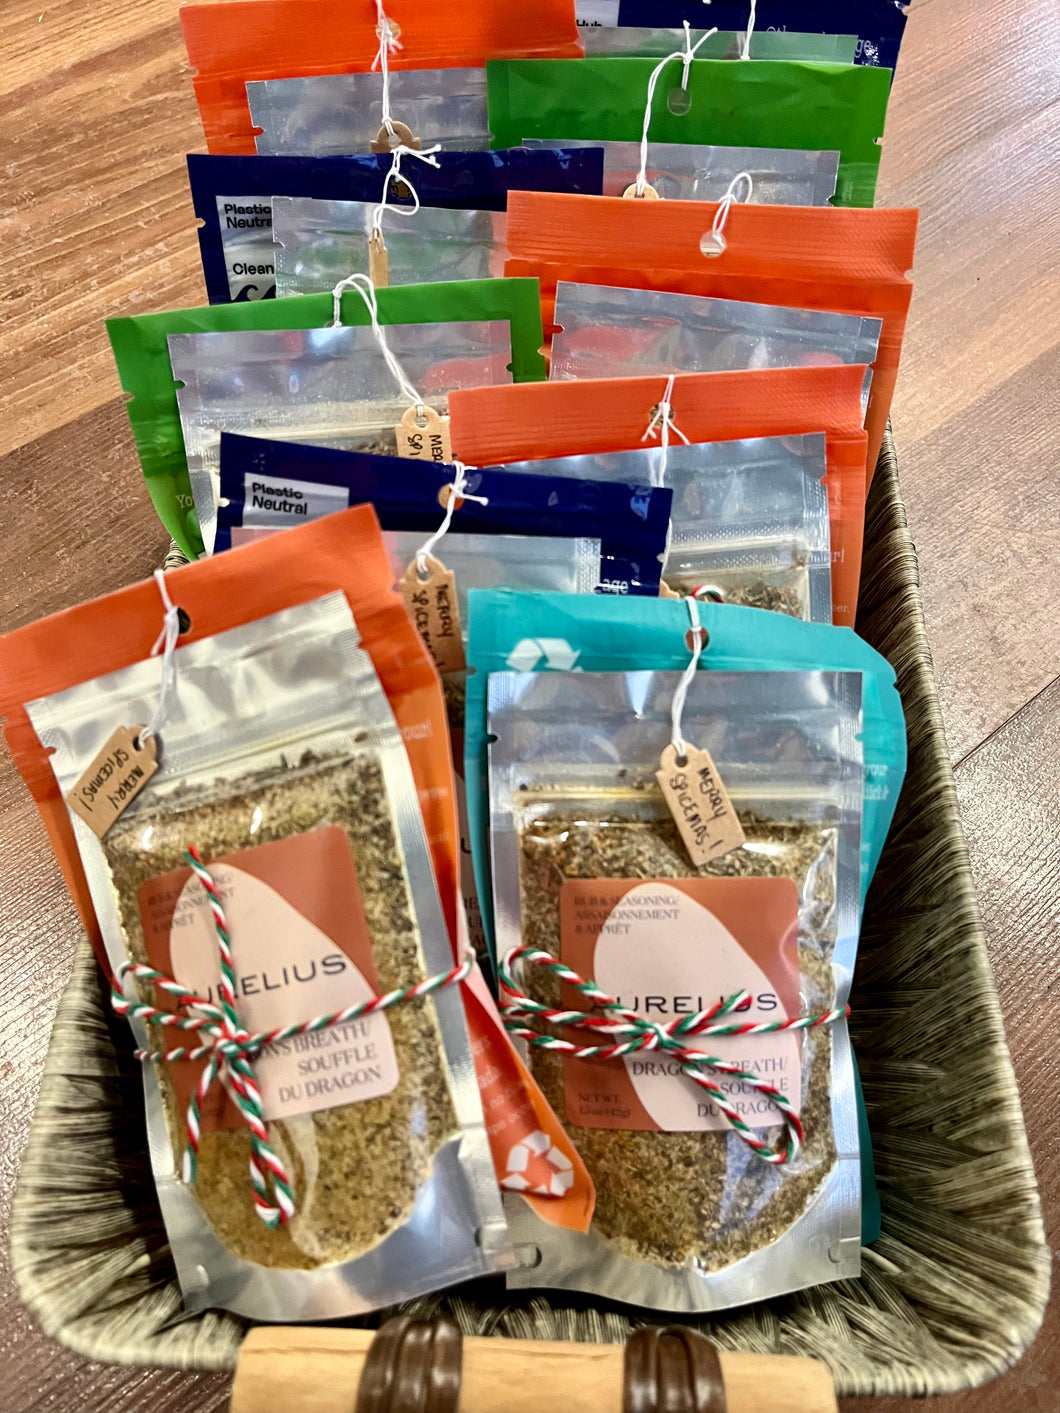 Merry Spicemas dip and spice sets